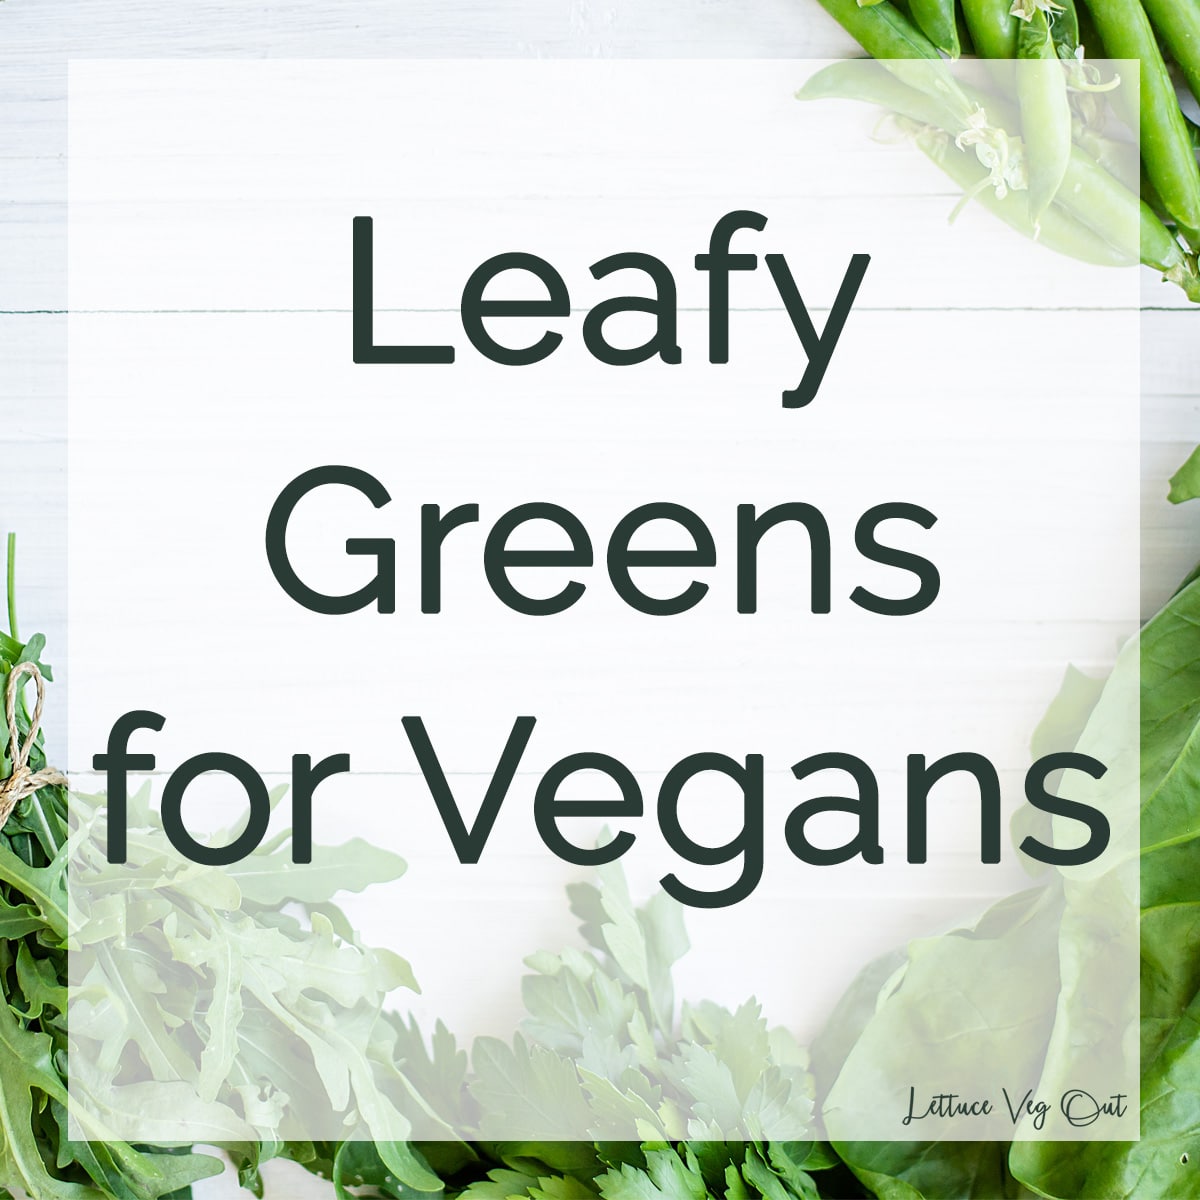 "Leafy greens for vegans" text with images of green vegetables around the edges.